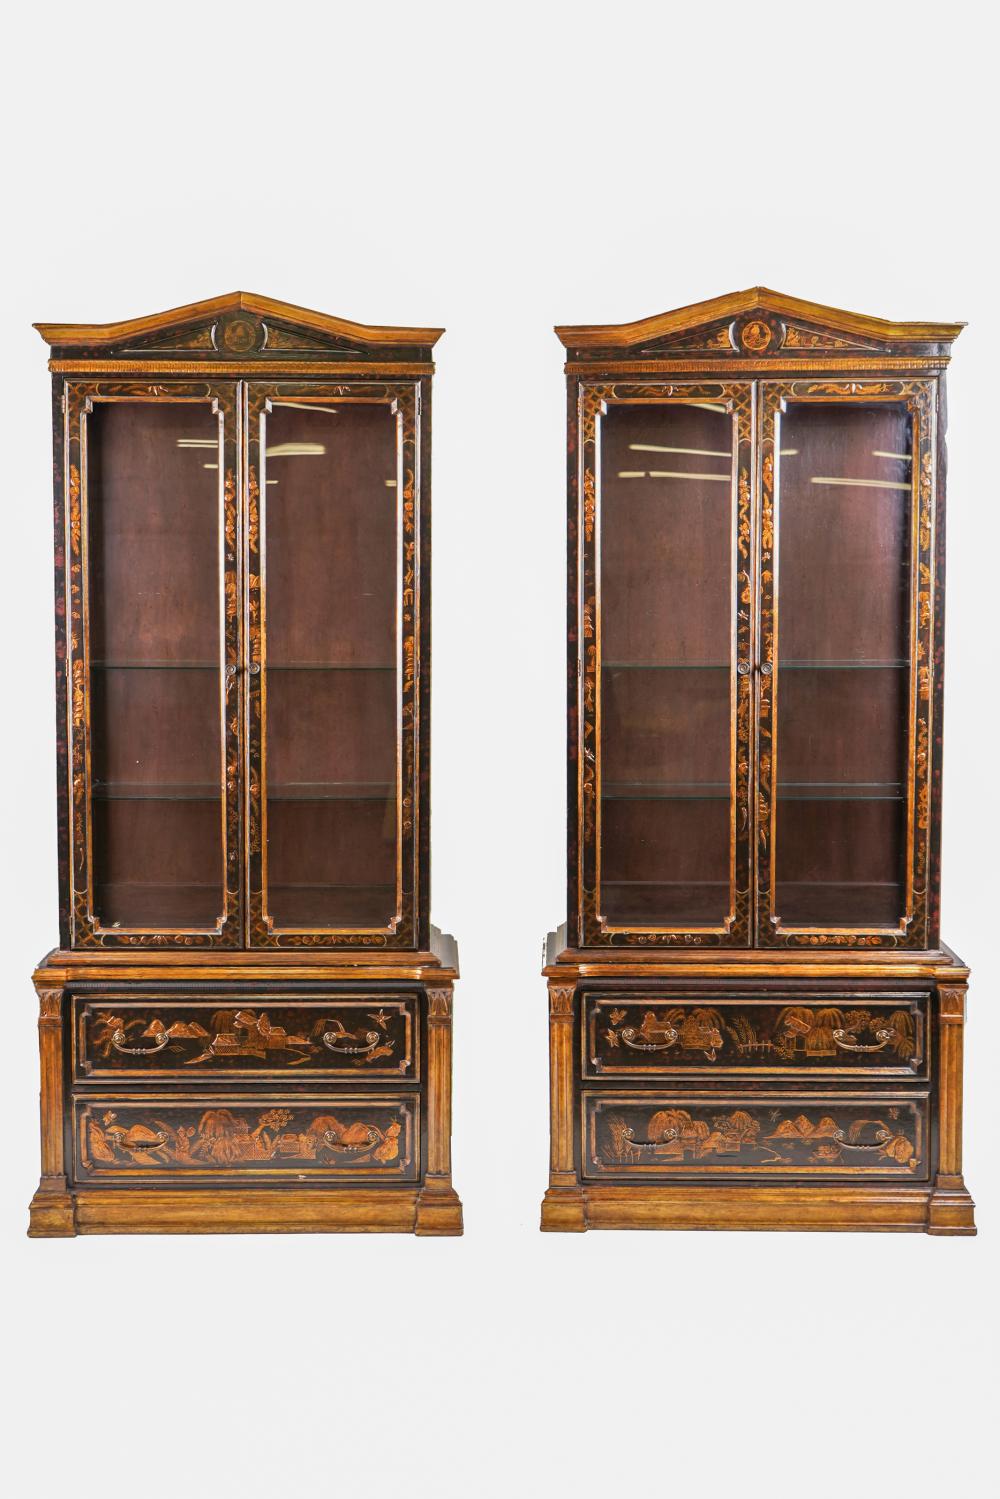 PAIR OF CHINOISERIE DISPLAY CASEScontemporary  332759